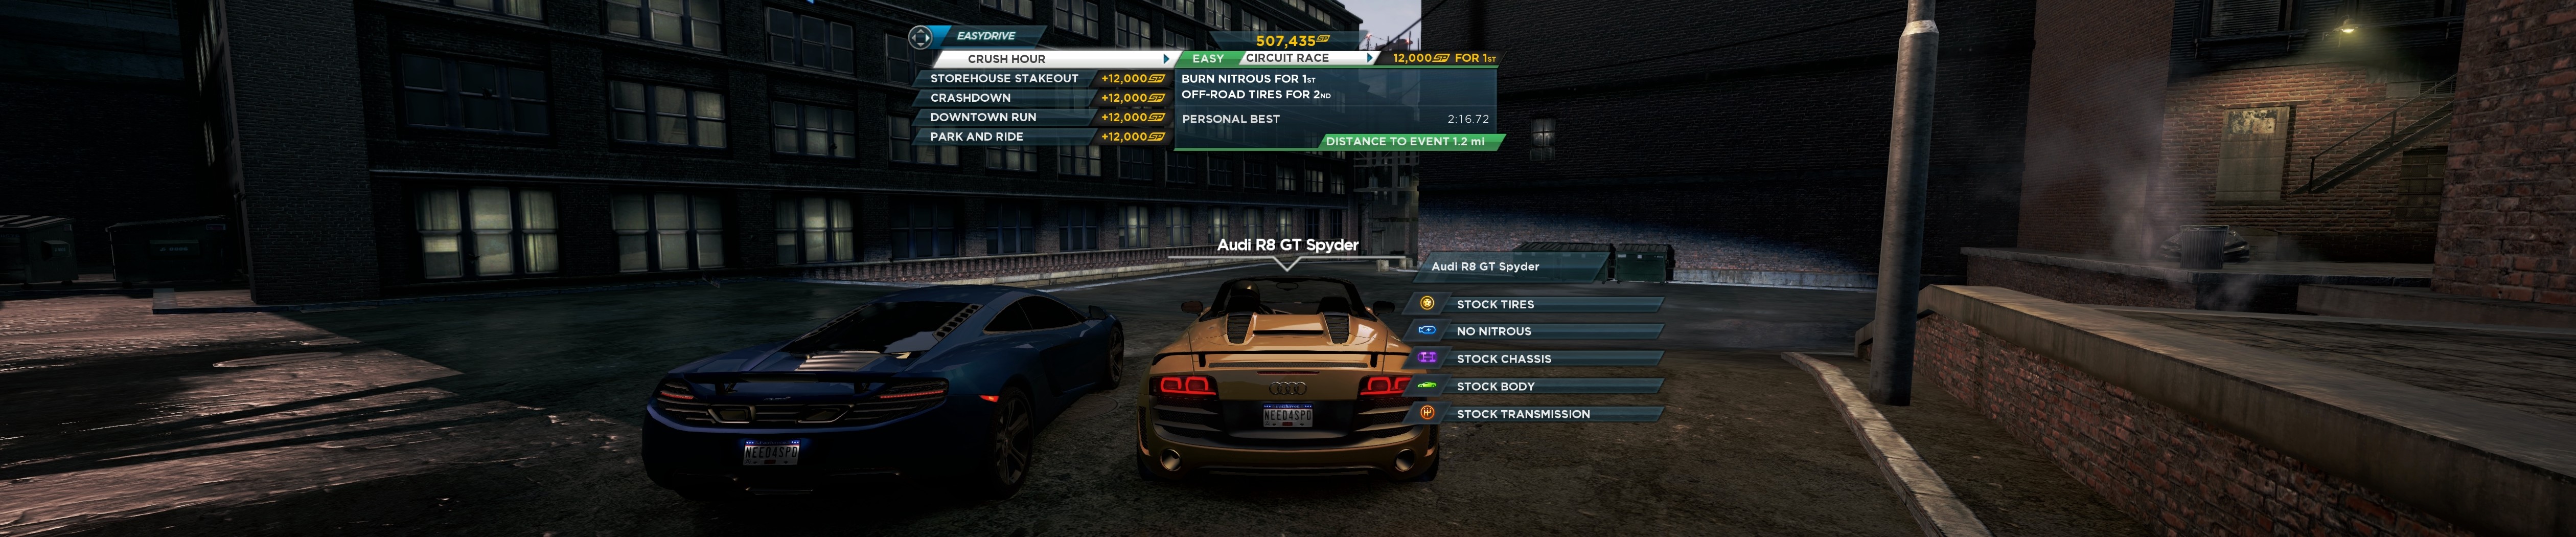 How To Run Need For Speed Most Wanted in Fullscreen –